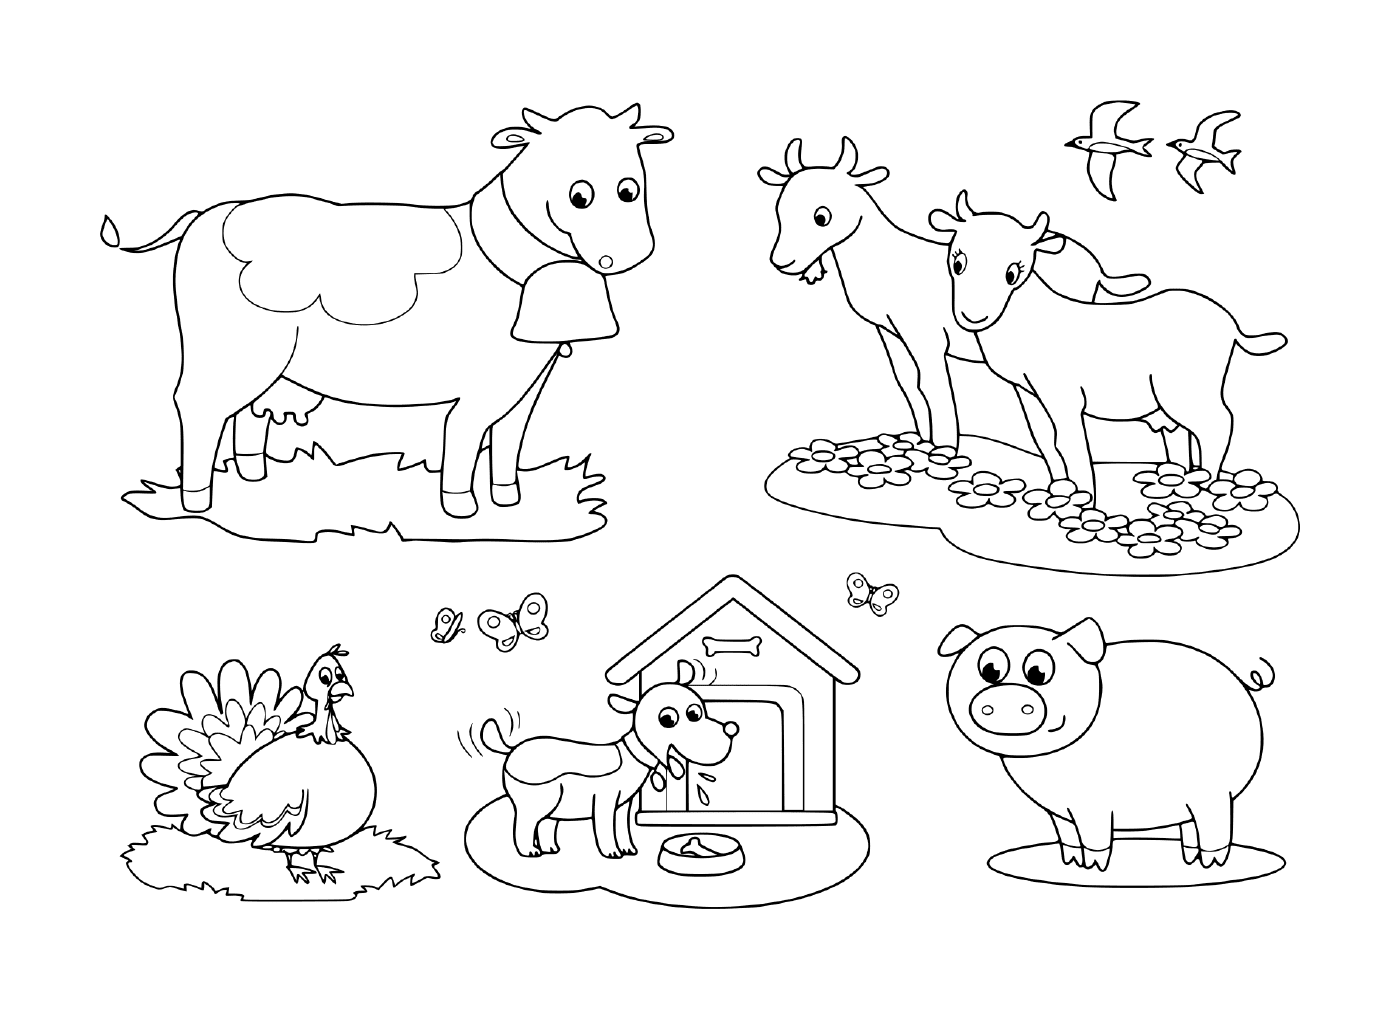  a group of farm animals including a goat, a cow, a pig, a turkey, a dog and a swallow 